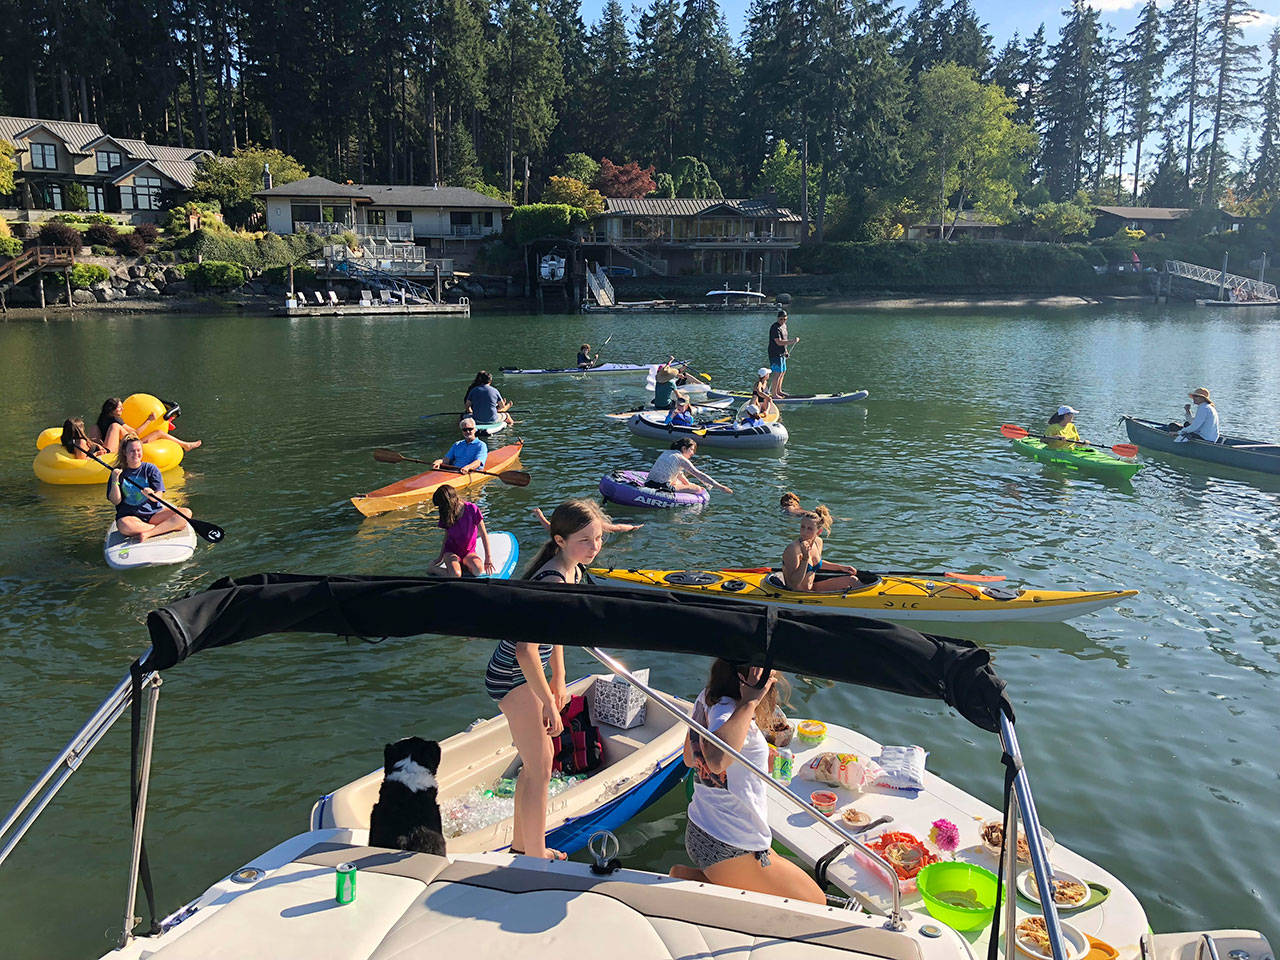 Let’s meet in the middle: Floating fun at Fletcher Bay